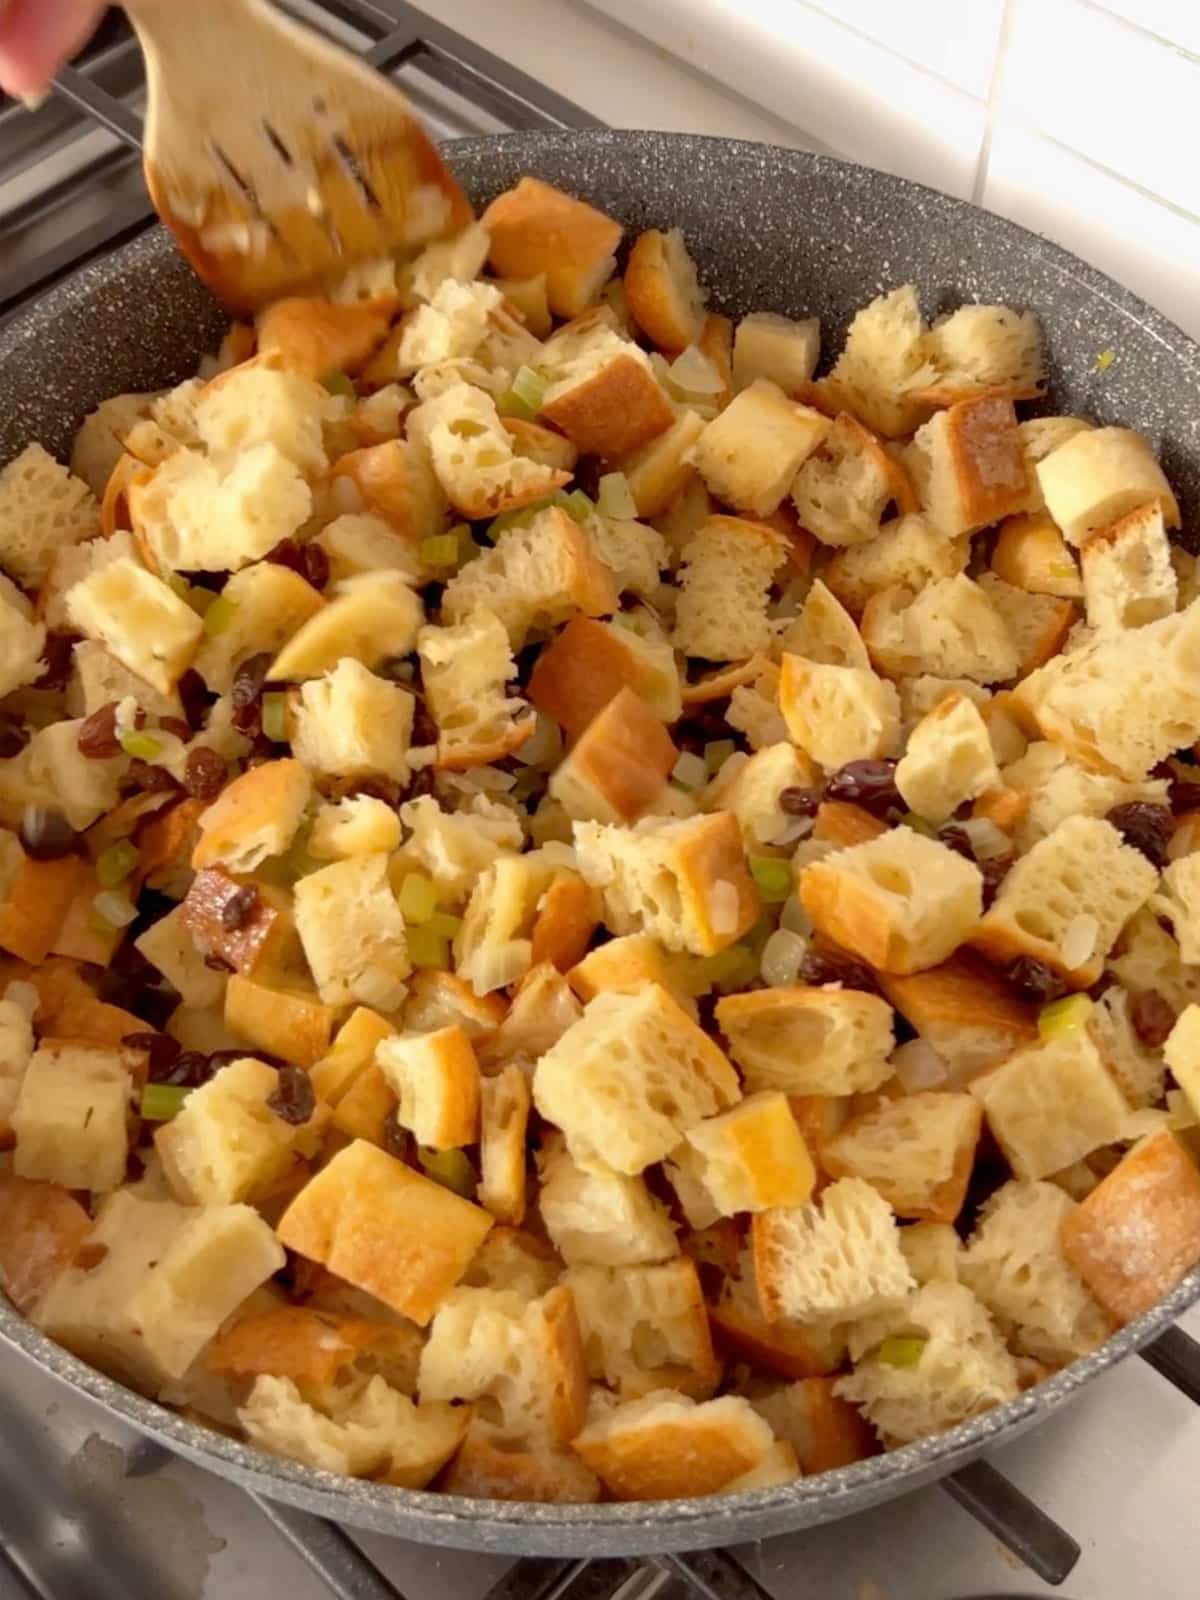 Bread and remaining stuffing ingredients combined in the skillet.